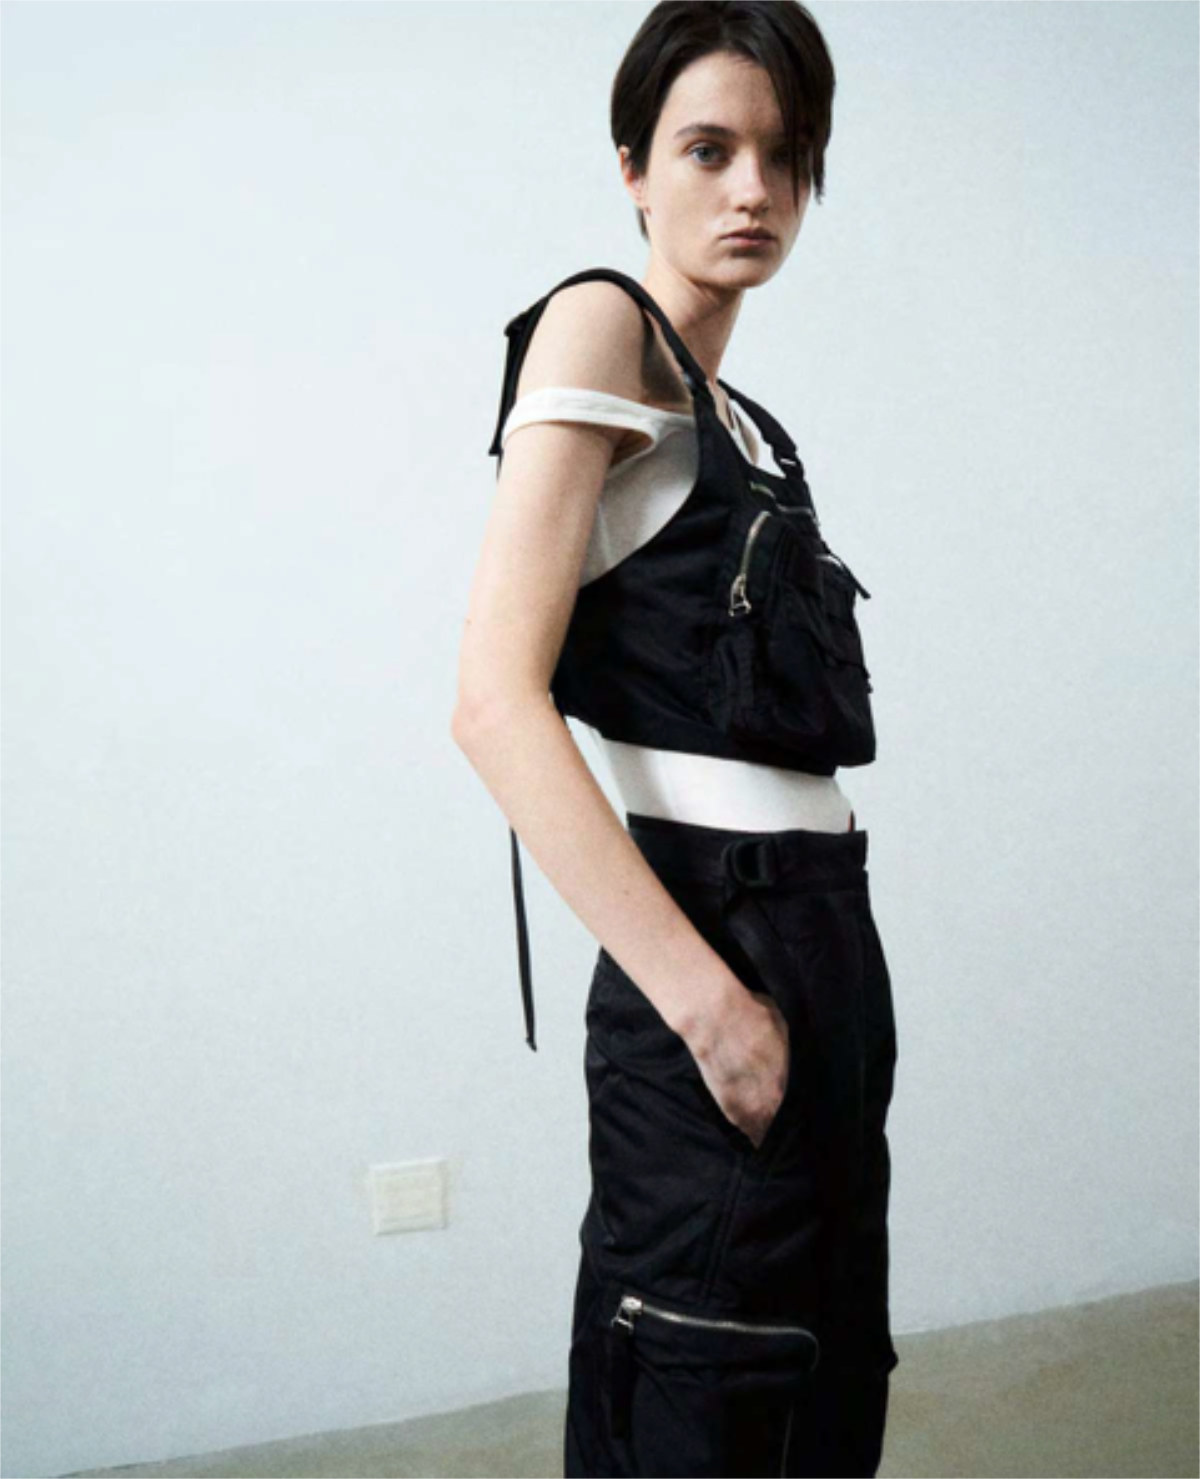 Helmut Lang Presents Its New Resort 2022 Women's Collection